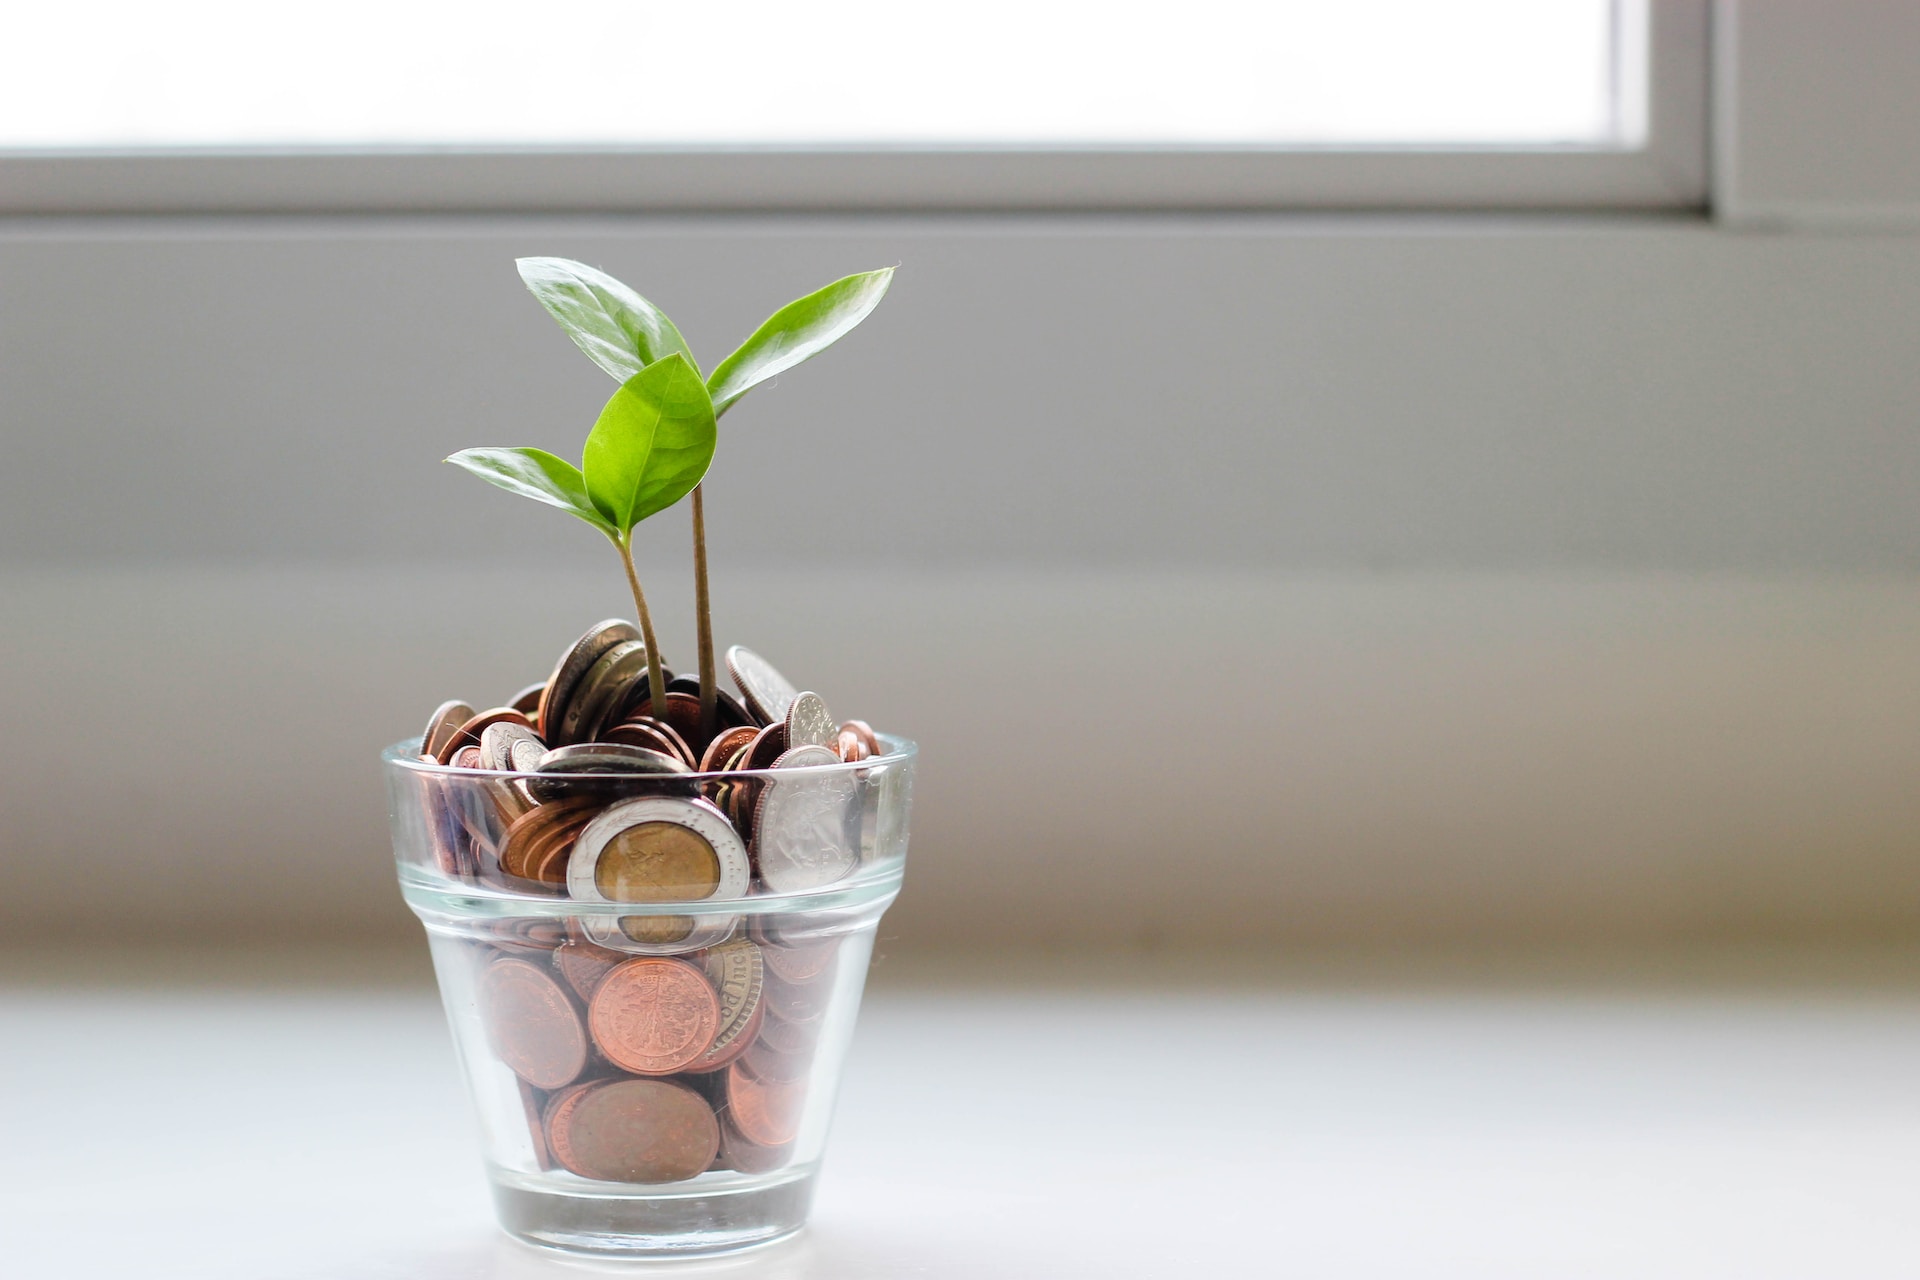 A jar filled with coins from which a plant has sprouted.